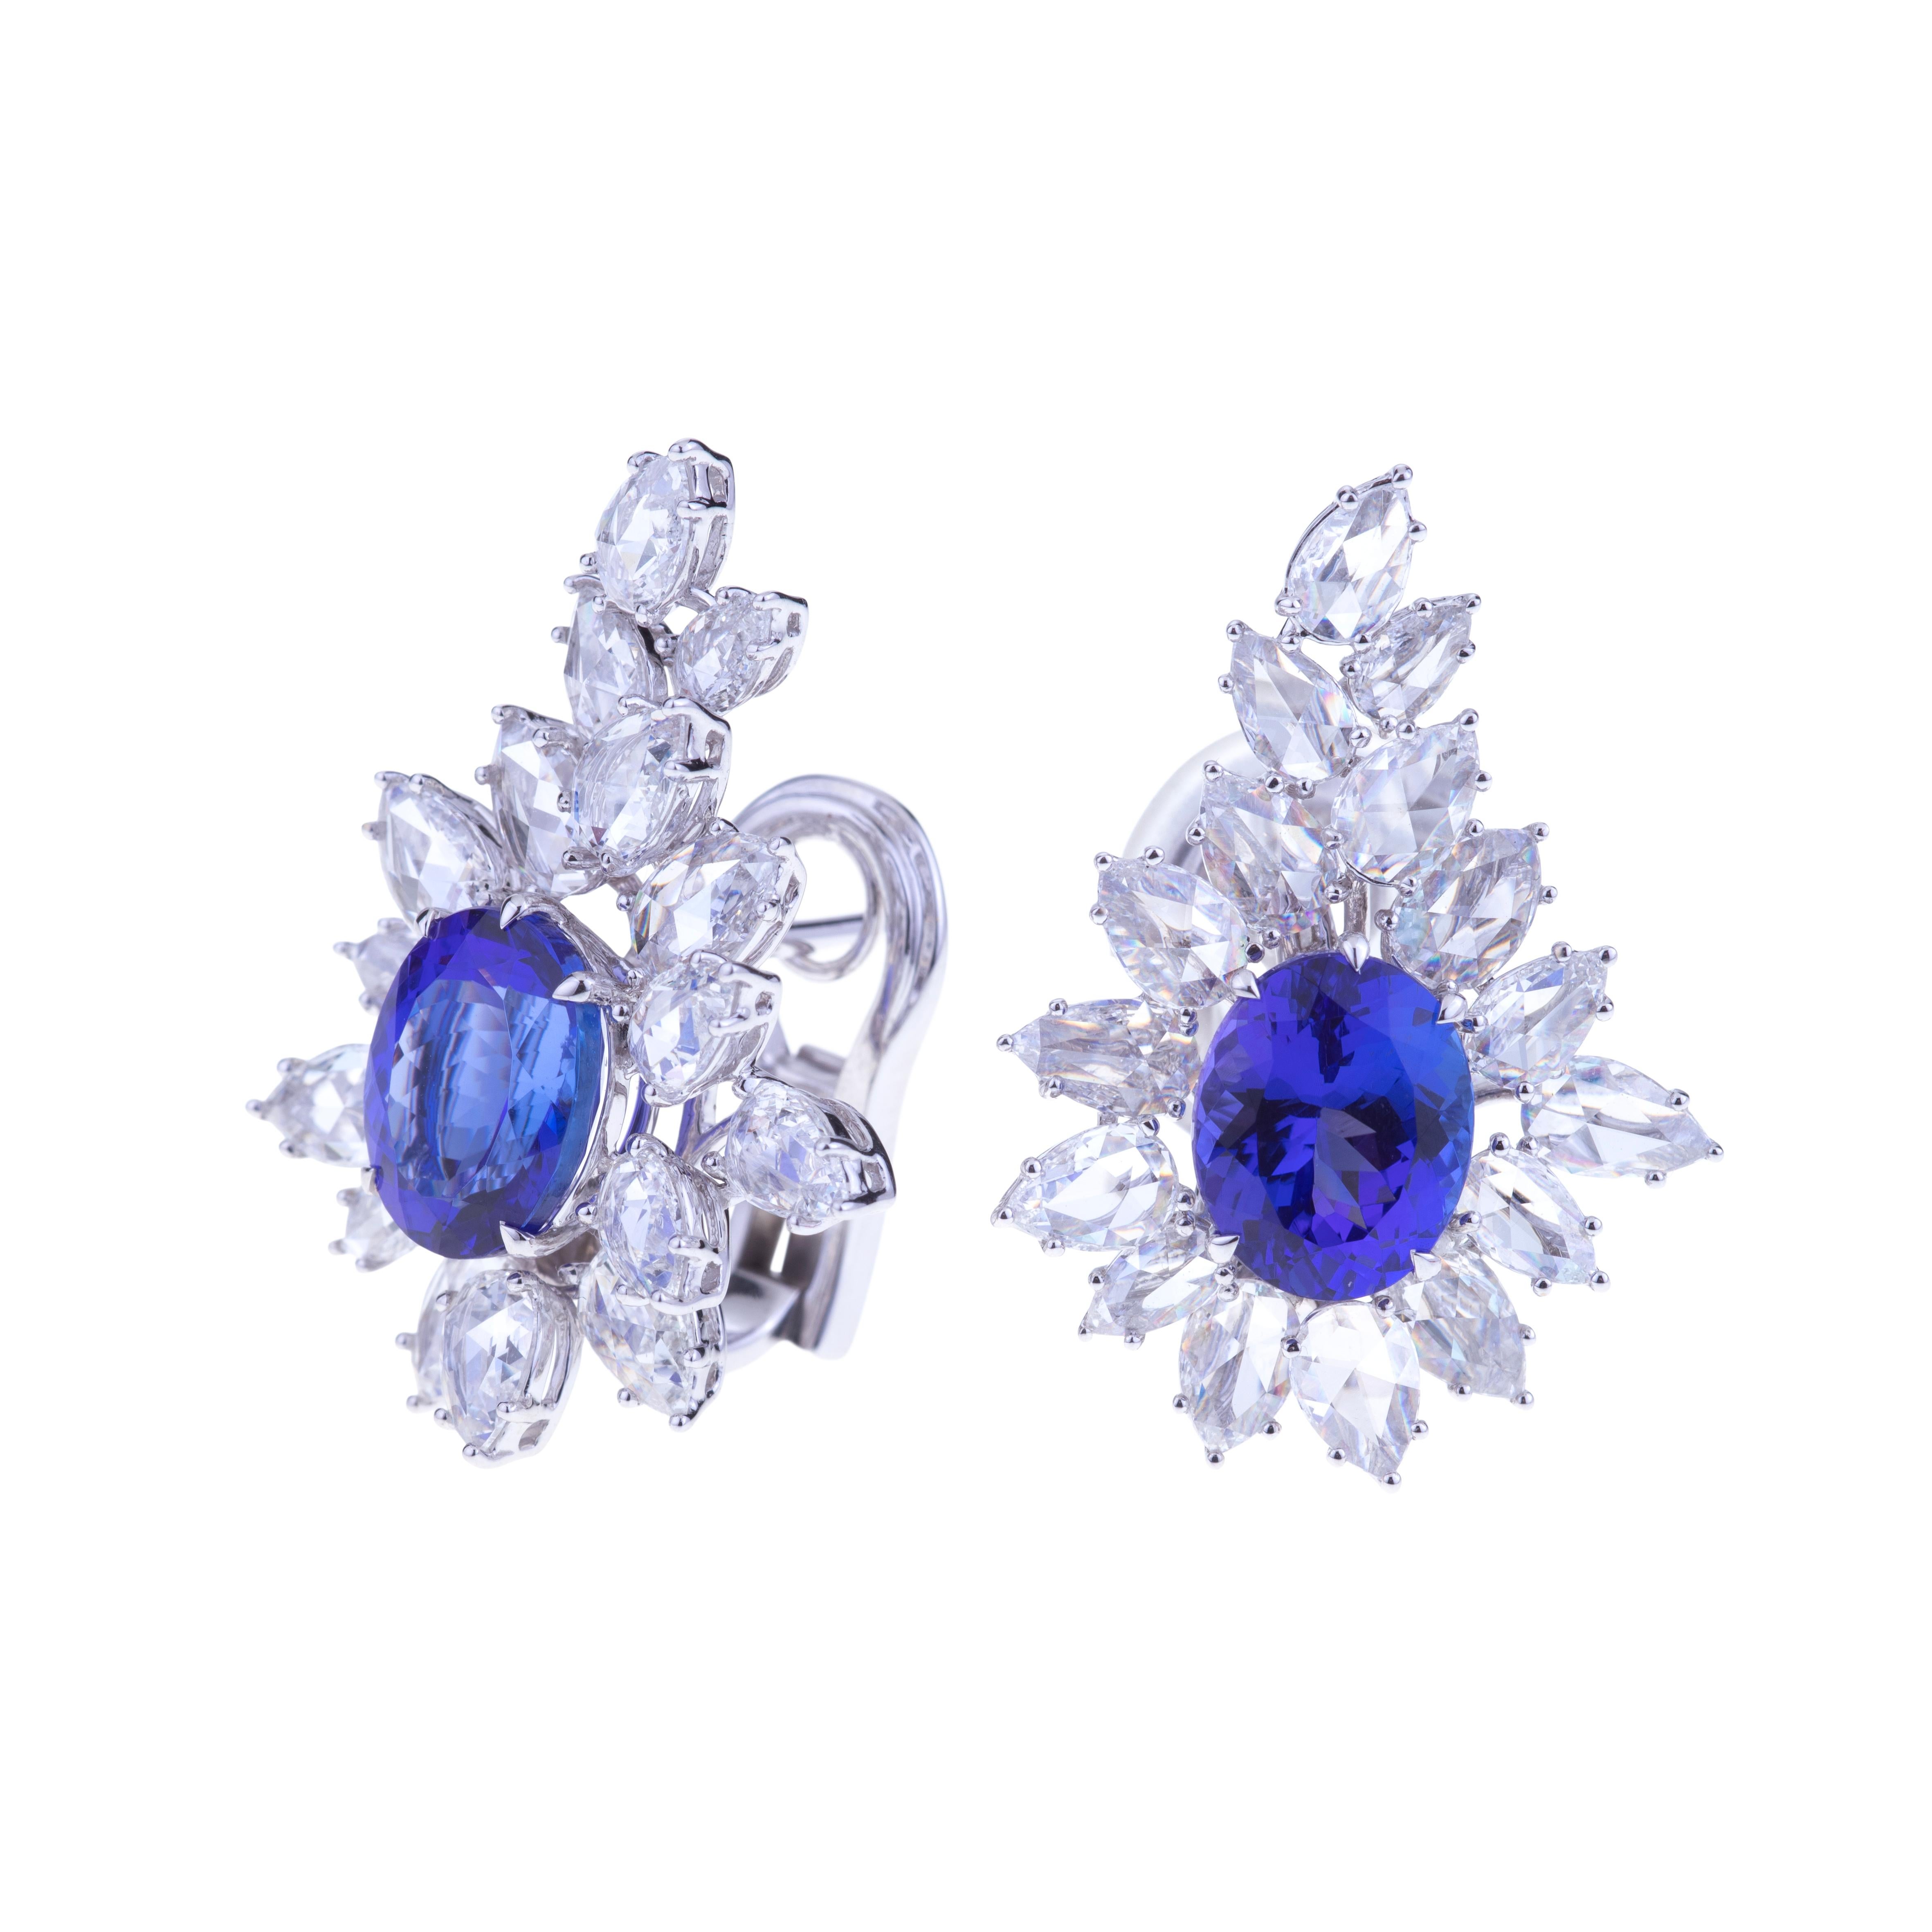 Selected Intense Blue Tanzanite Earrings Set in White Gold with Diamonds.
Unique Earrings White Gold with a Couple of Intense Blue Tanzanite ct. 7.58 Faceted Oval Cut mm. 10x8. Diamonds are All Around (ct. 5.33 VVS) which are sellected  with a